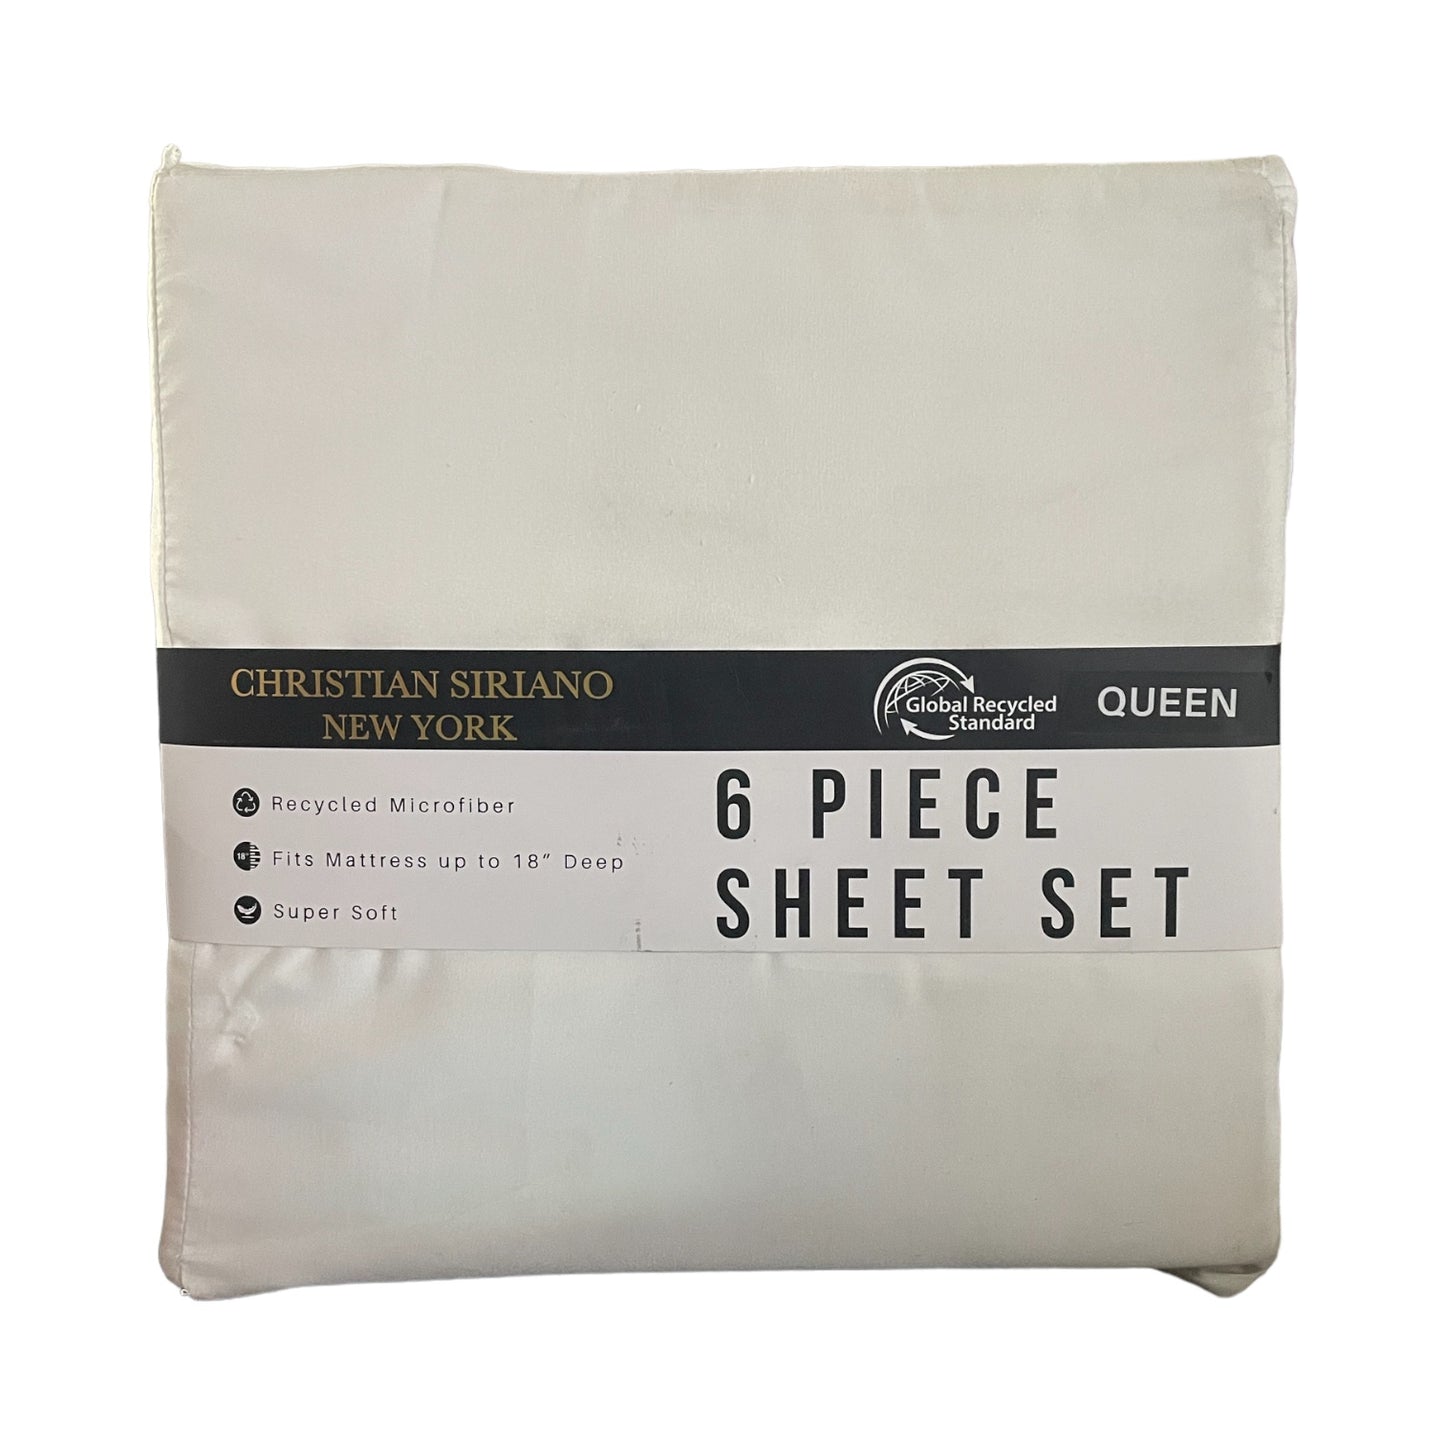 Christian Siriano New York 100% Polyester Microfiber Sheet Sets, Queen (White)